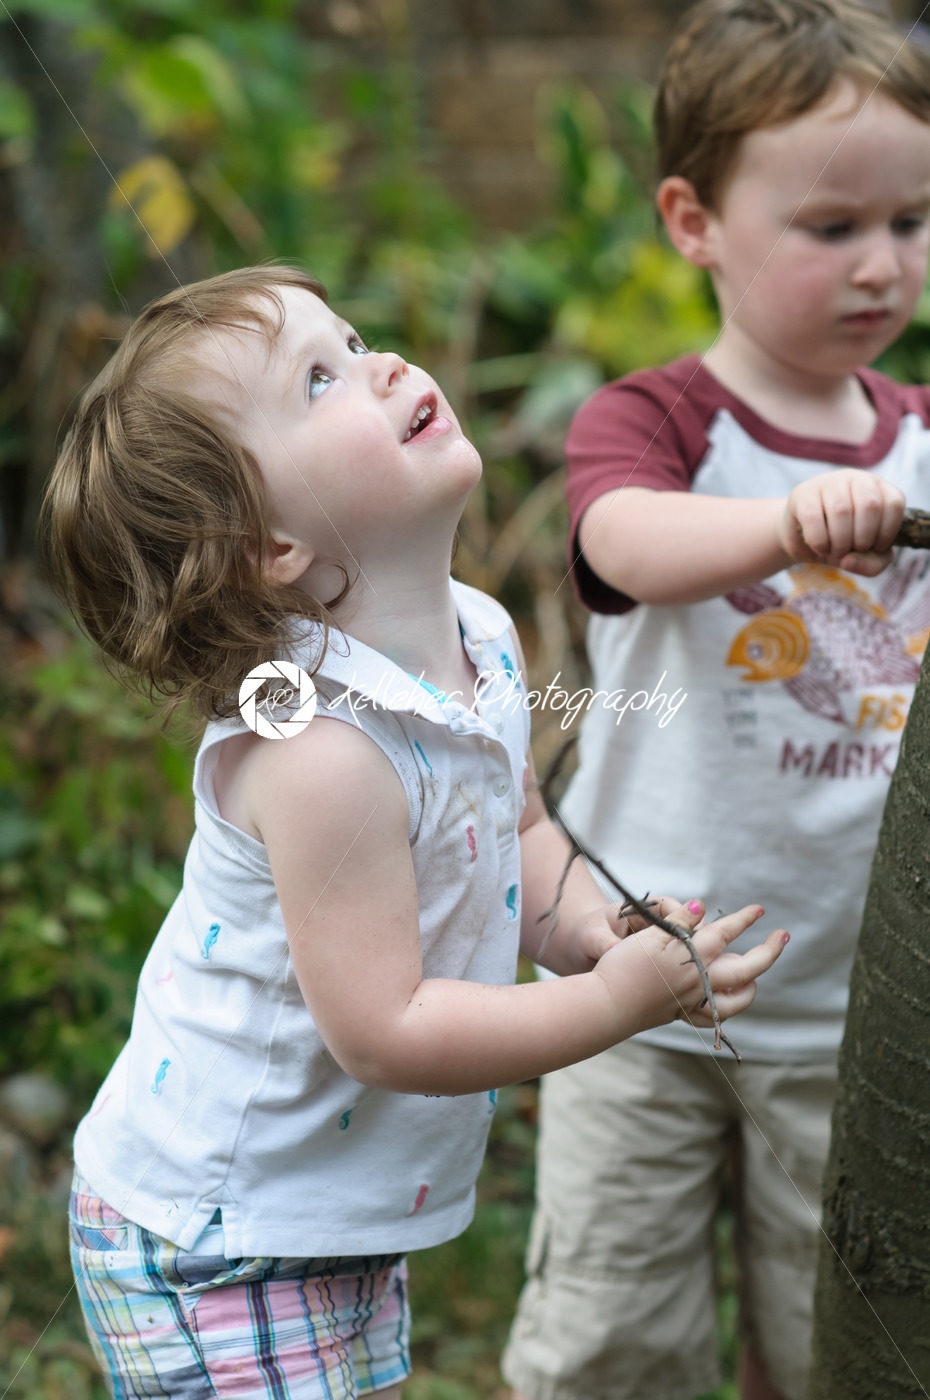 Young boy and girl looking up at a tree in the back yard - Kelleher Photography Store